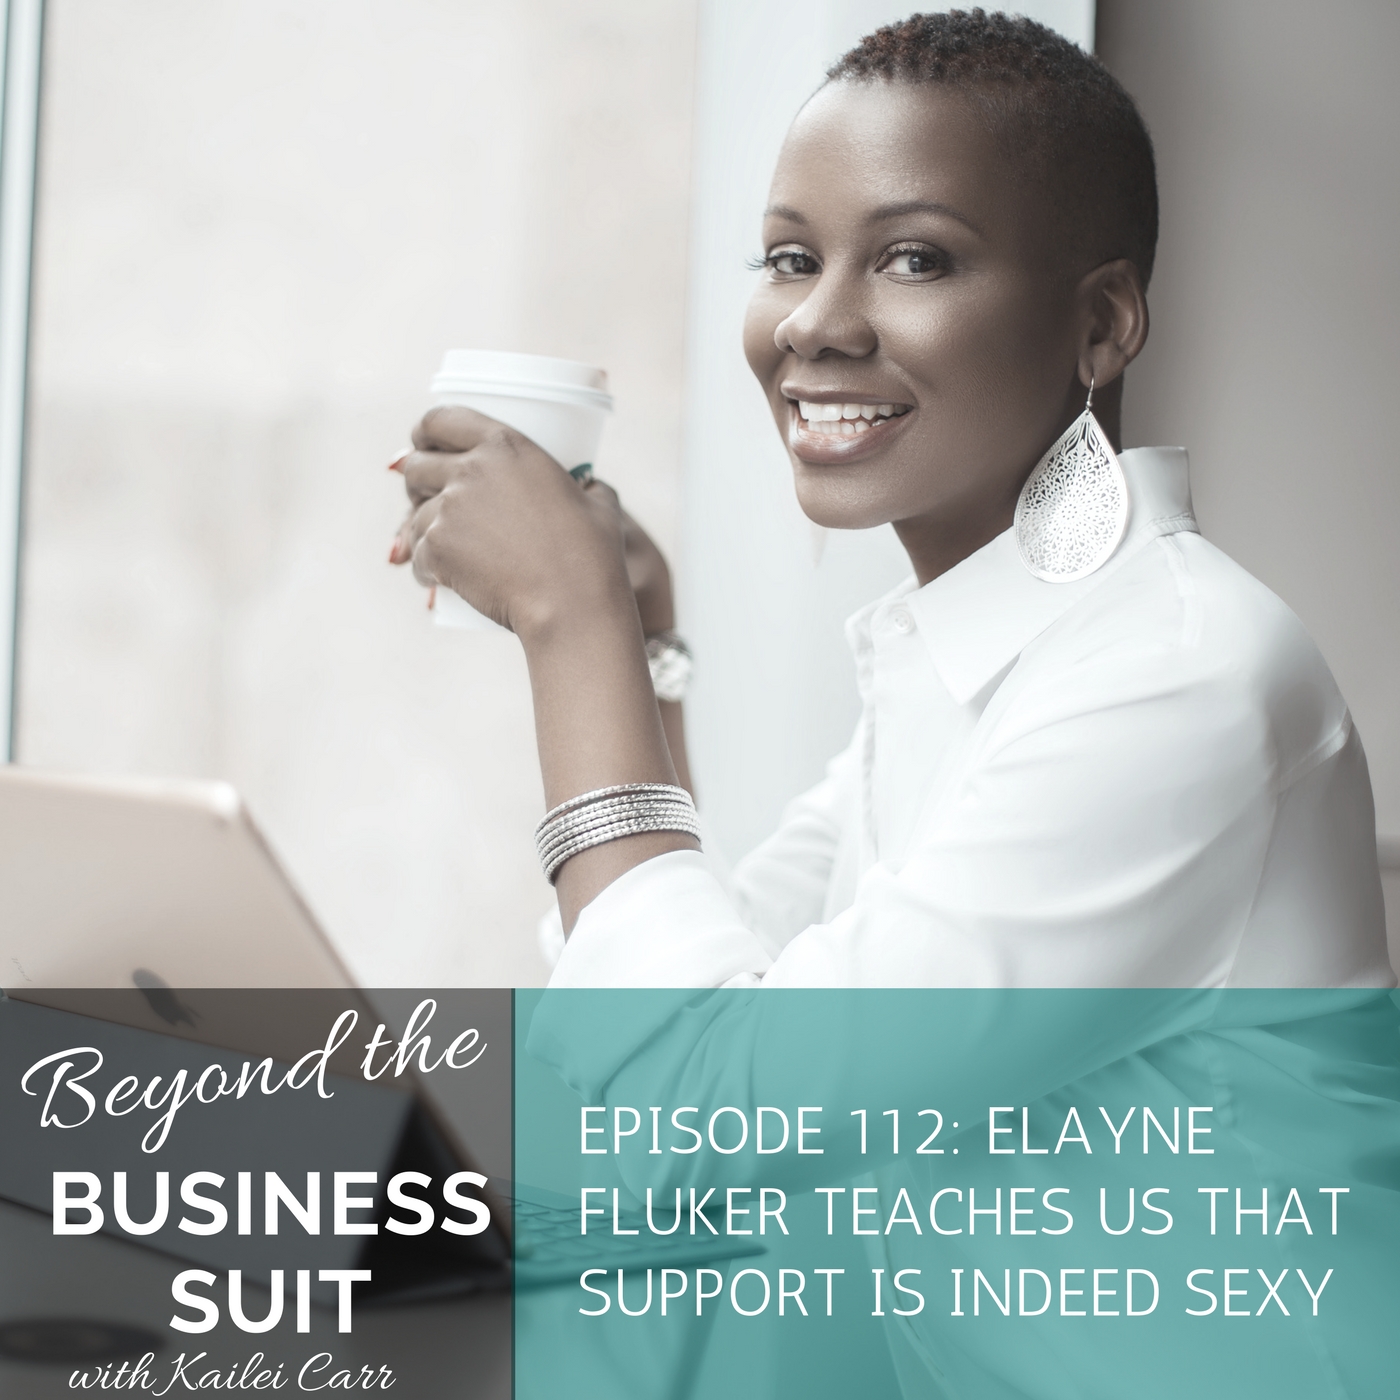 Beyond the Business Suit Podcast with Elayne Fluker